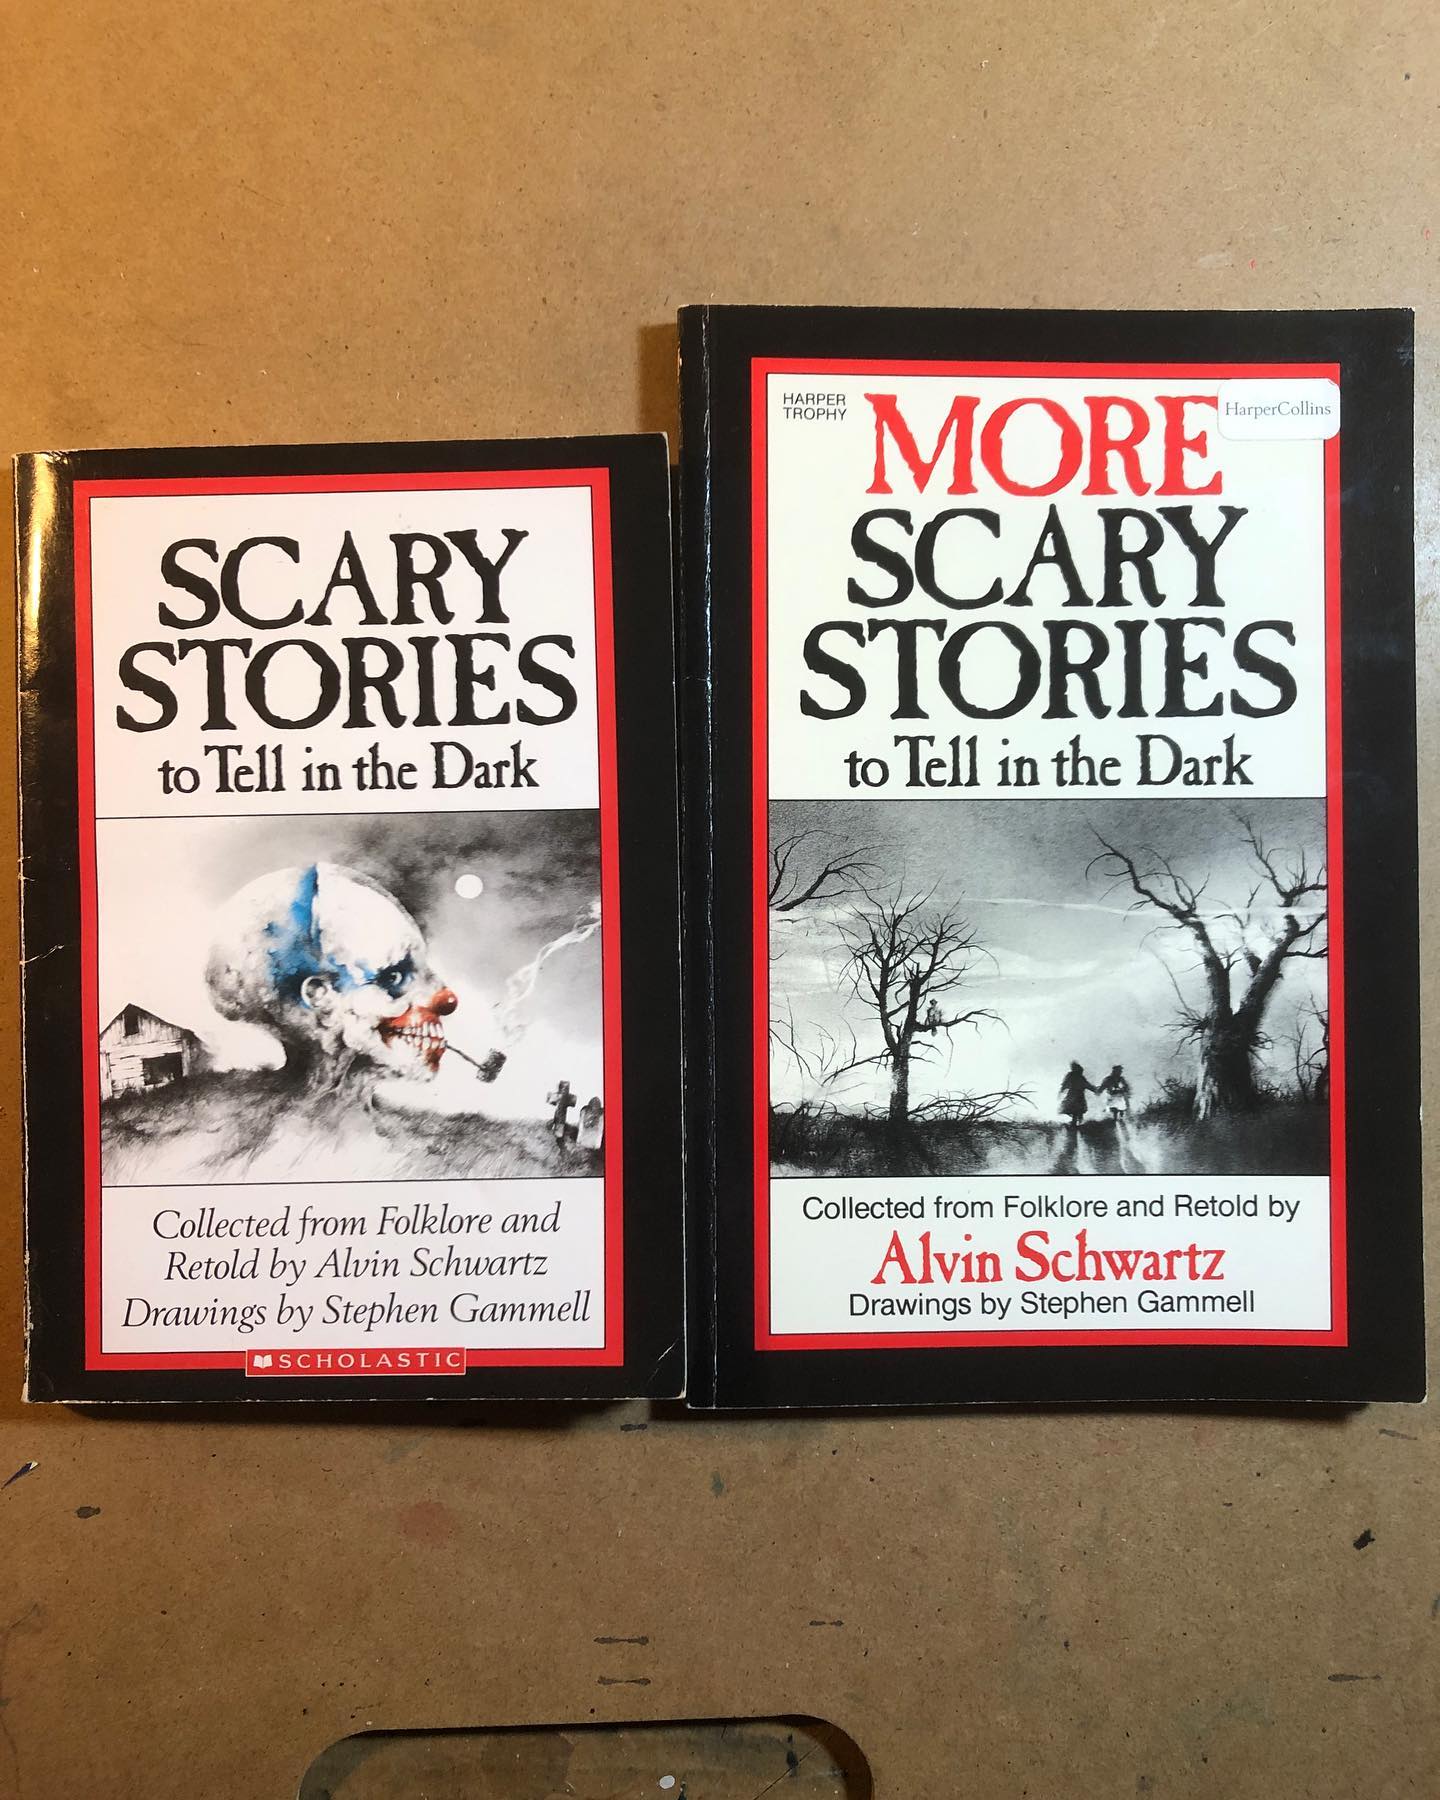 Scary Stories to Tell in the Dark books - artwork by Stephen Gammell